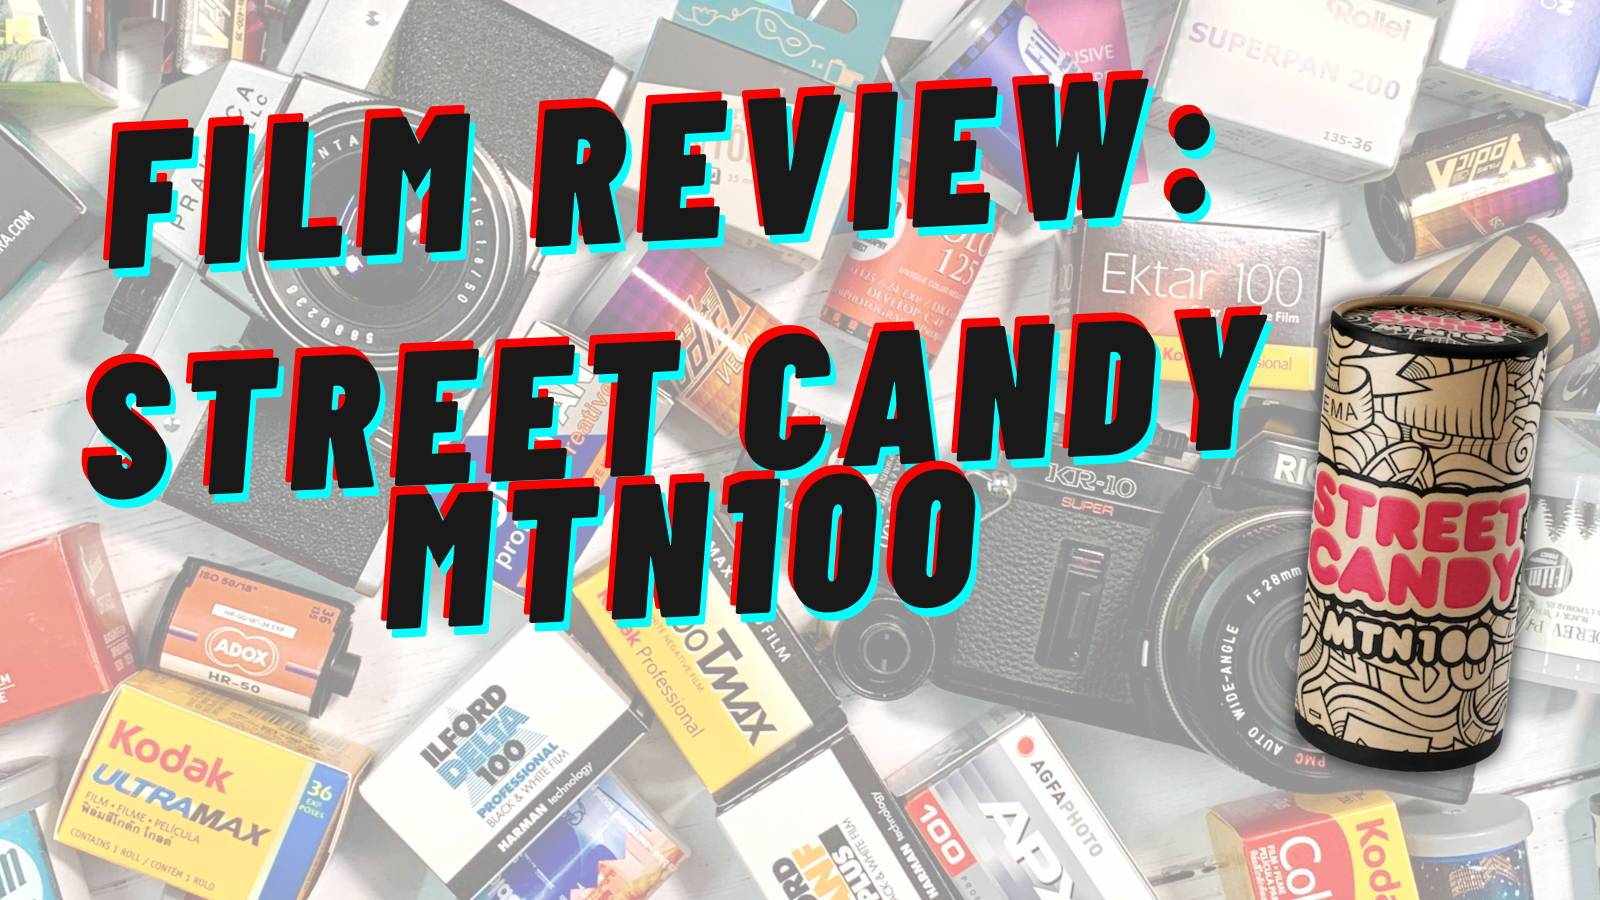 Film Review Street Candy MTN100 - Analogue Wonderland